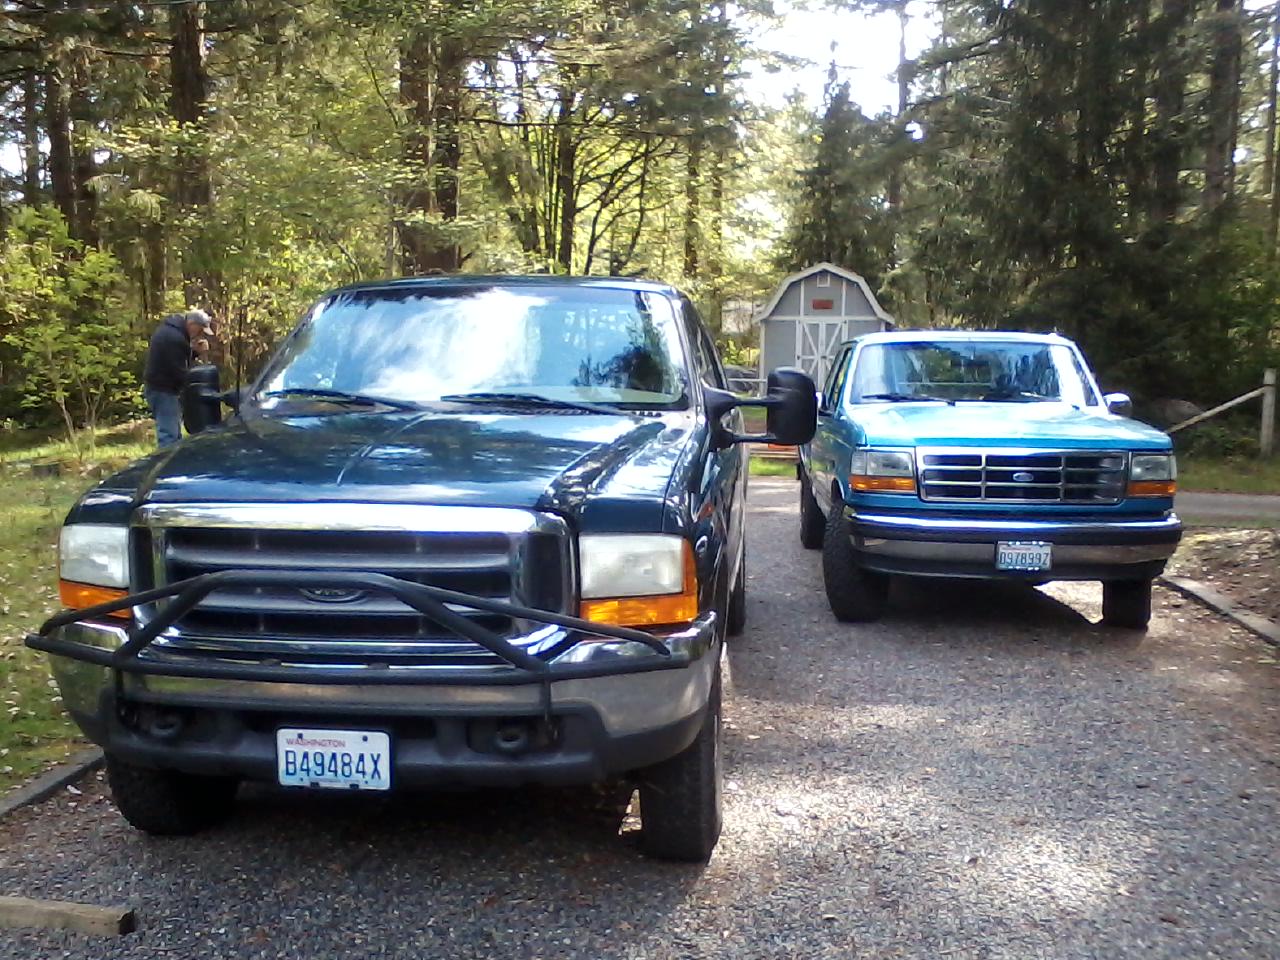 My 93 f-150 5.8 v8 4x4 and my uncles 99 f-250 6.8 v10 4x4 =)